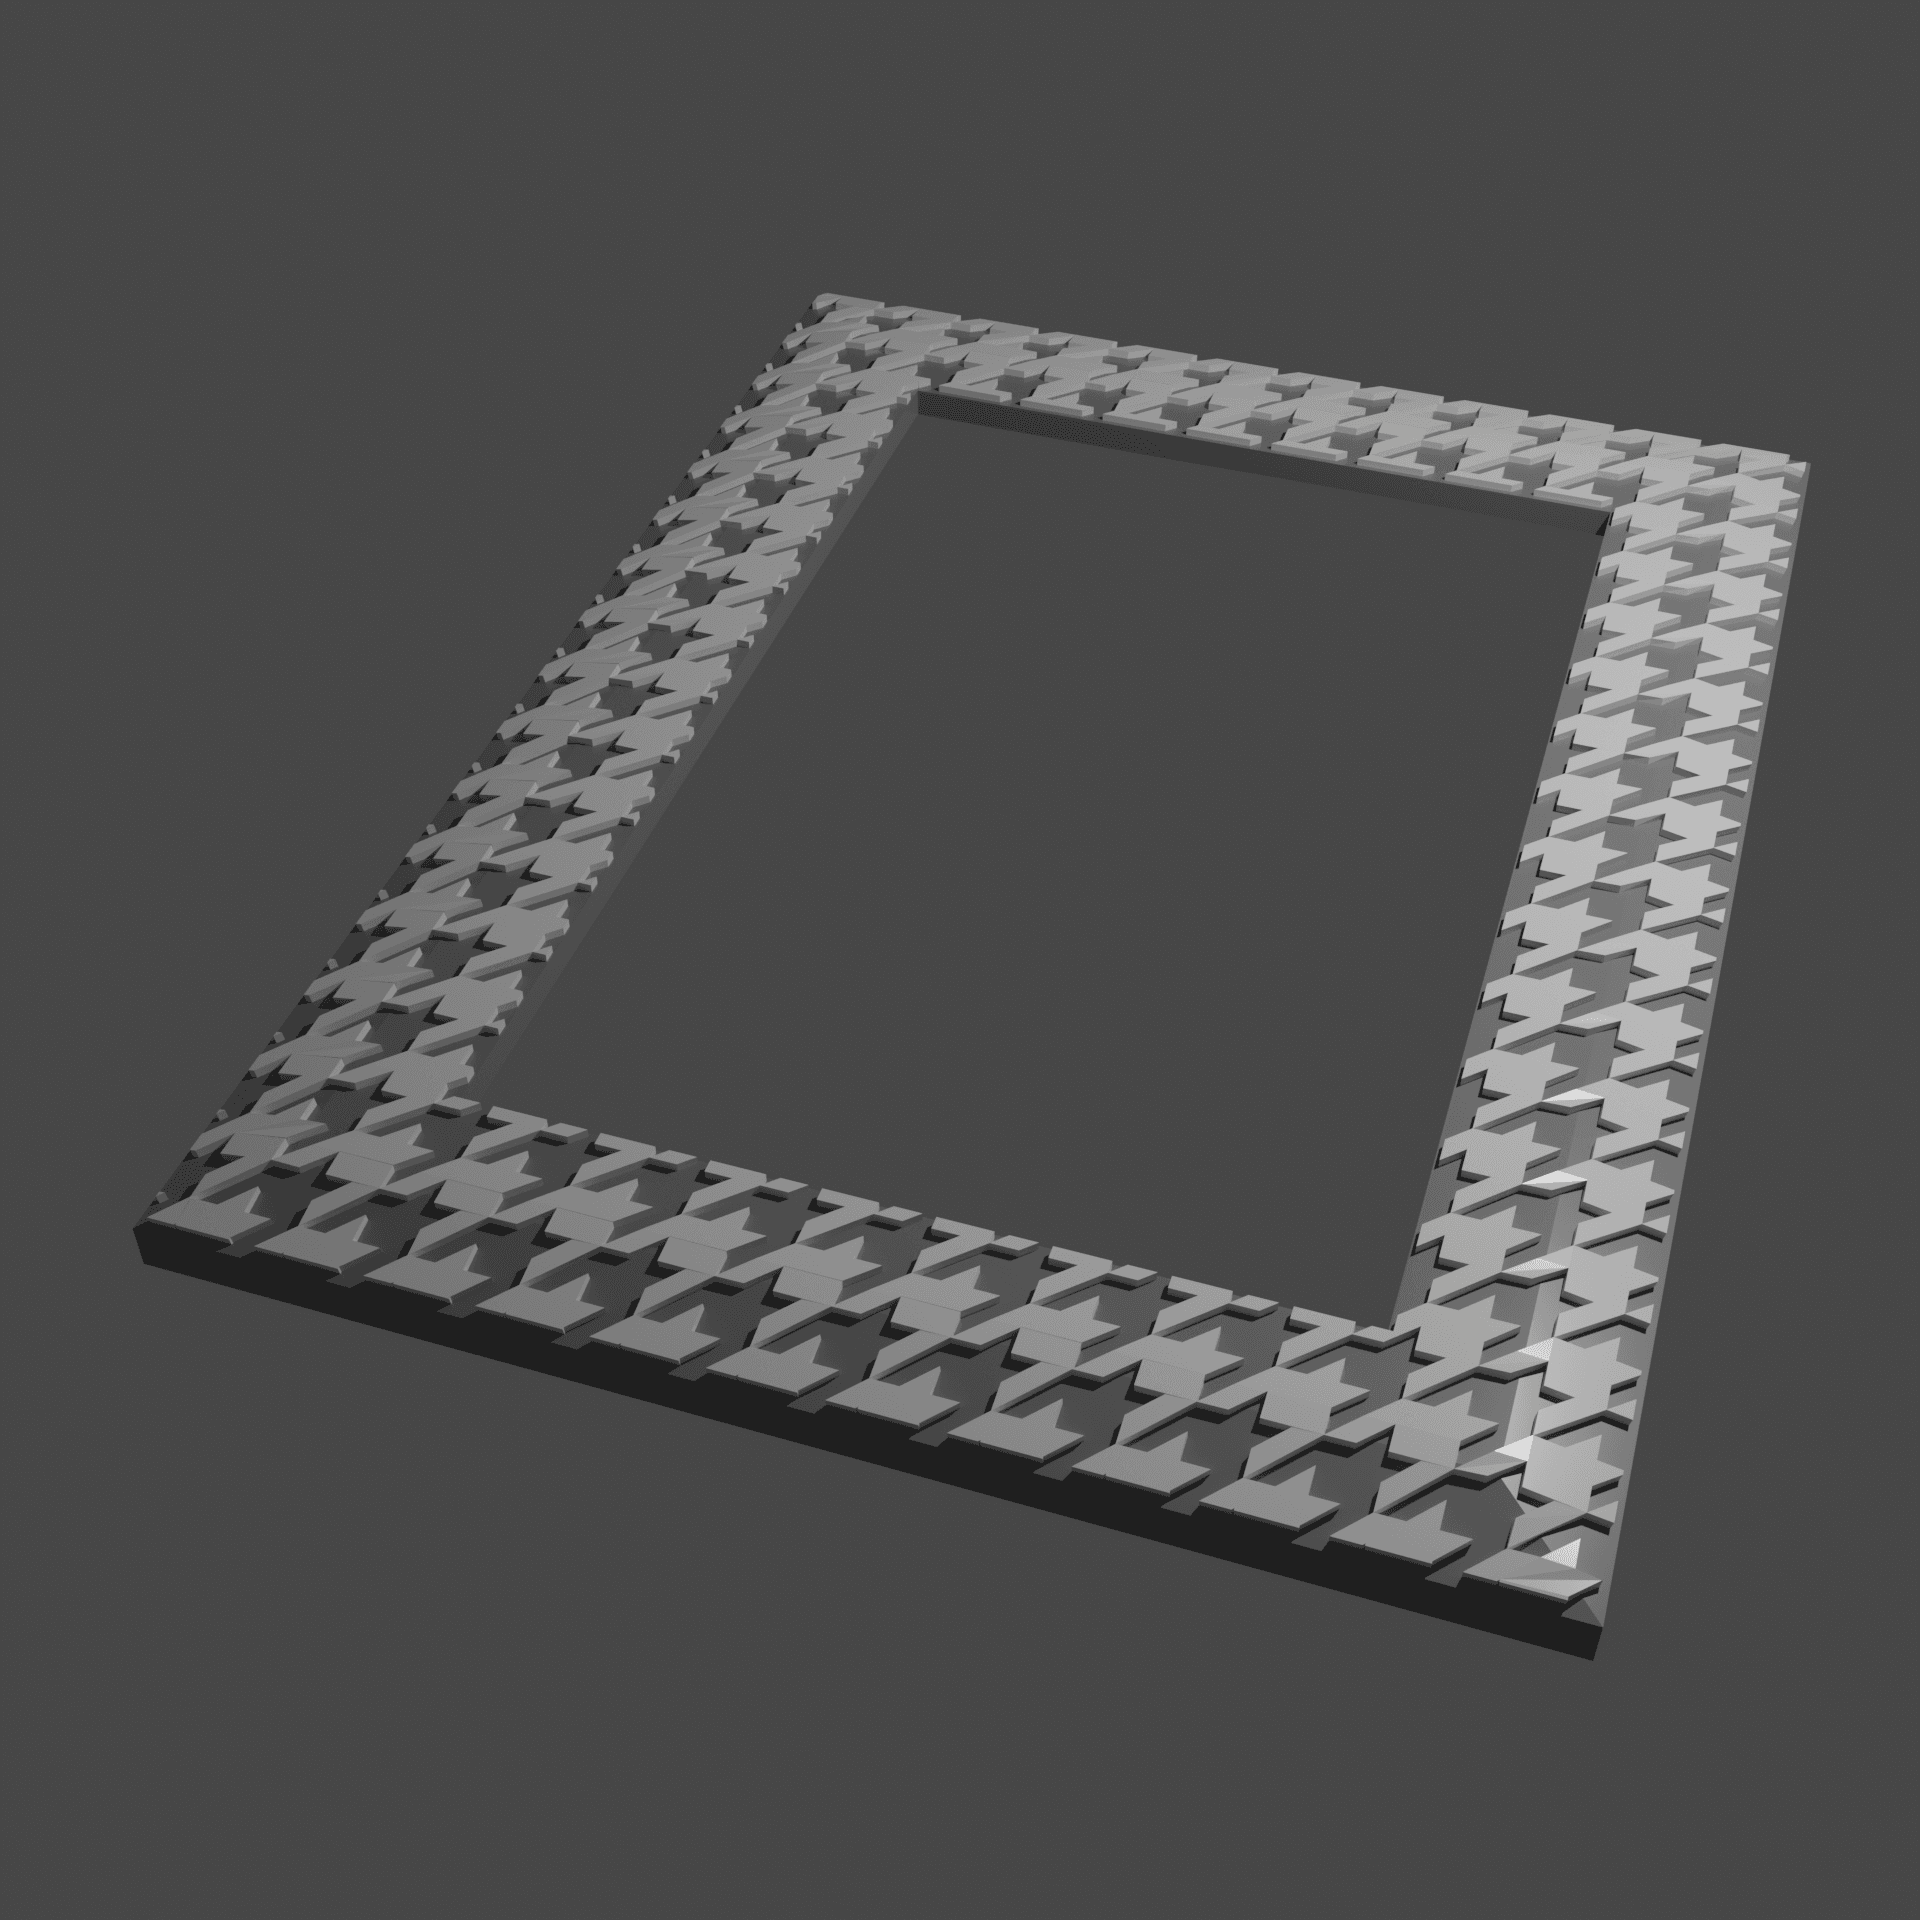 Houndstooth - Remix of 4x6 Picture Frame 2 3d model